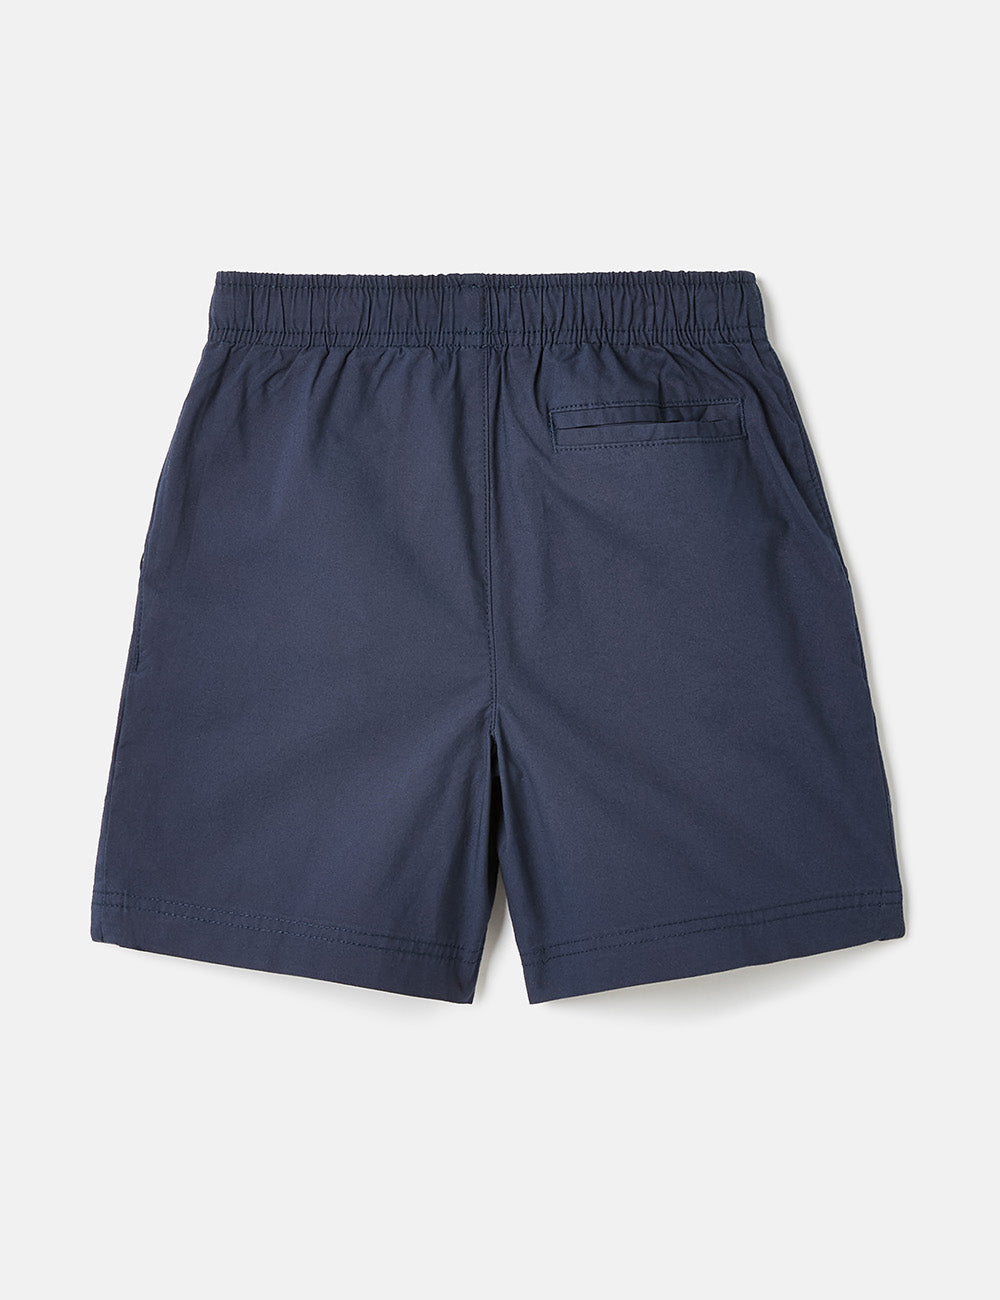 Joules Quayside Chino Short - French Navy